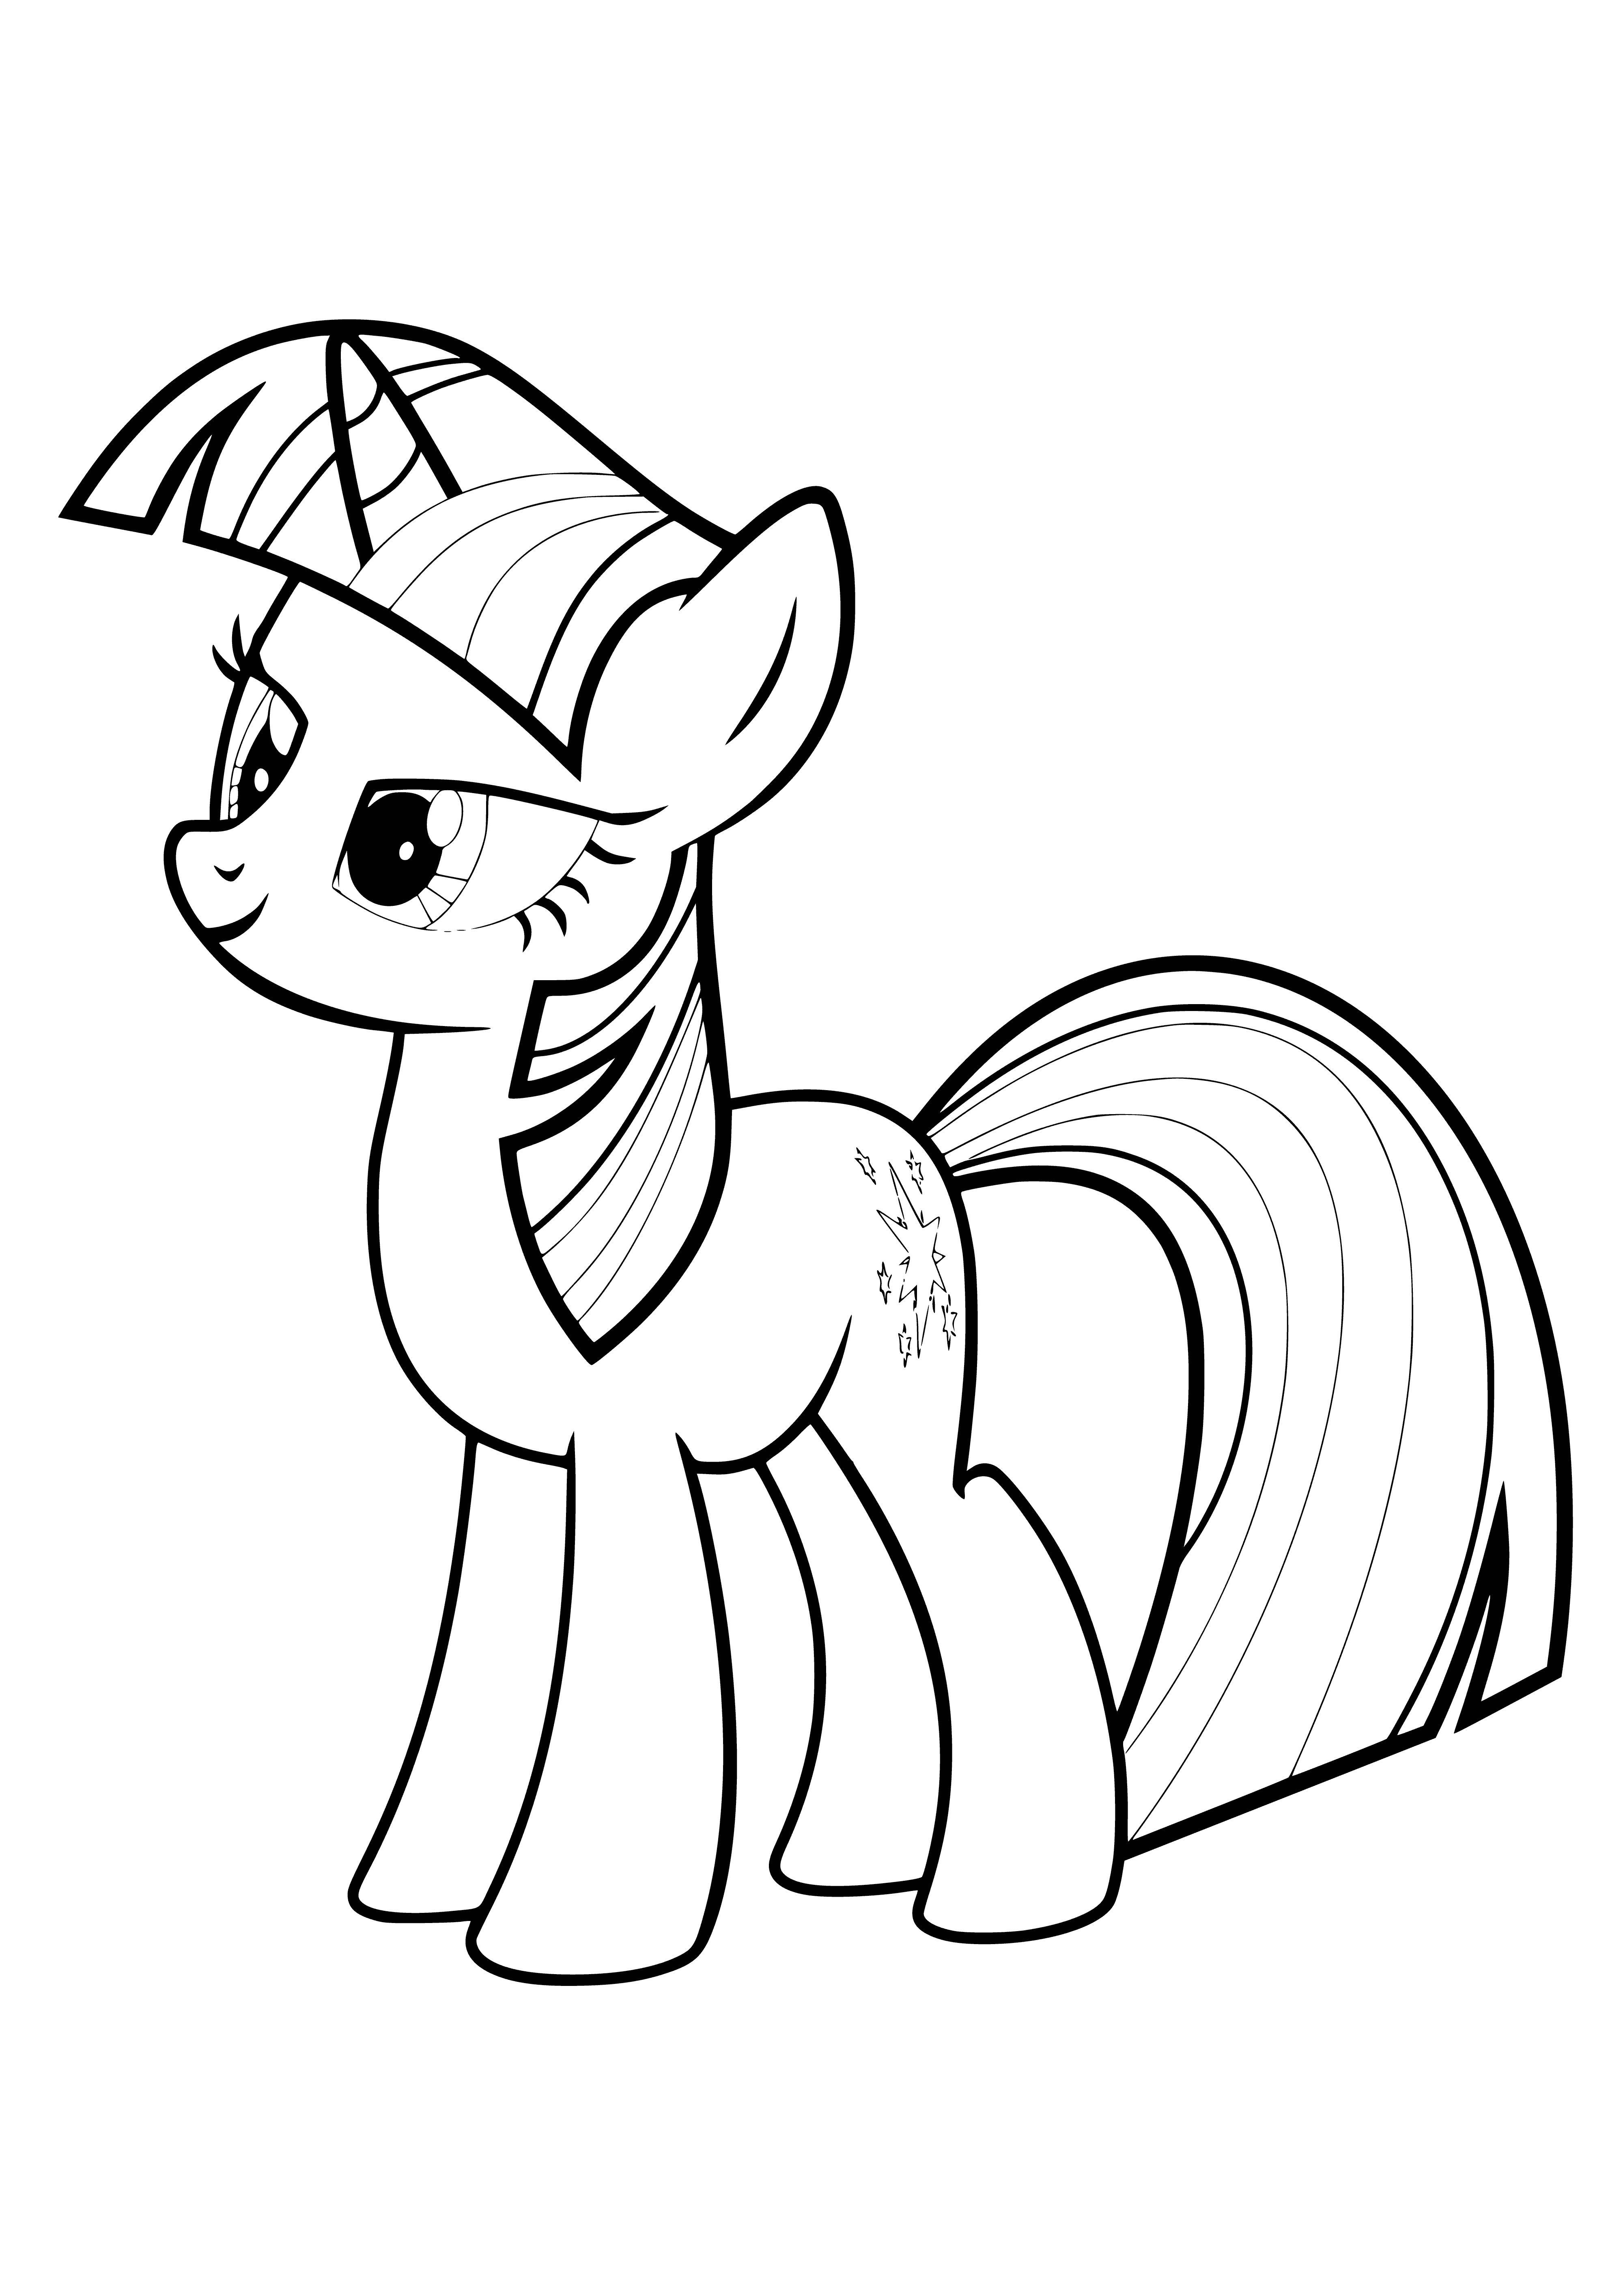 coloring page: Twilight Sparkle is a purple pony with a pink mane/tail & a star cutie mark. She is a gifted magic student & Element of Magic. #MyLittlePony